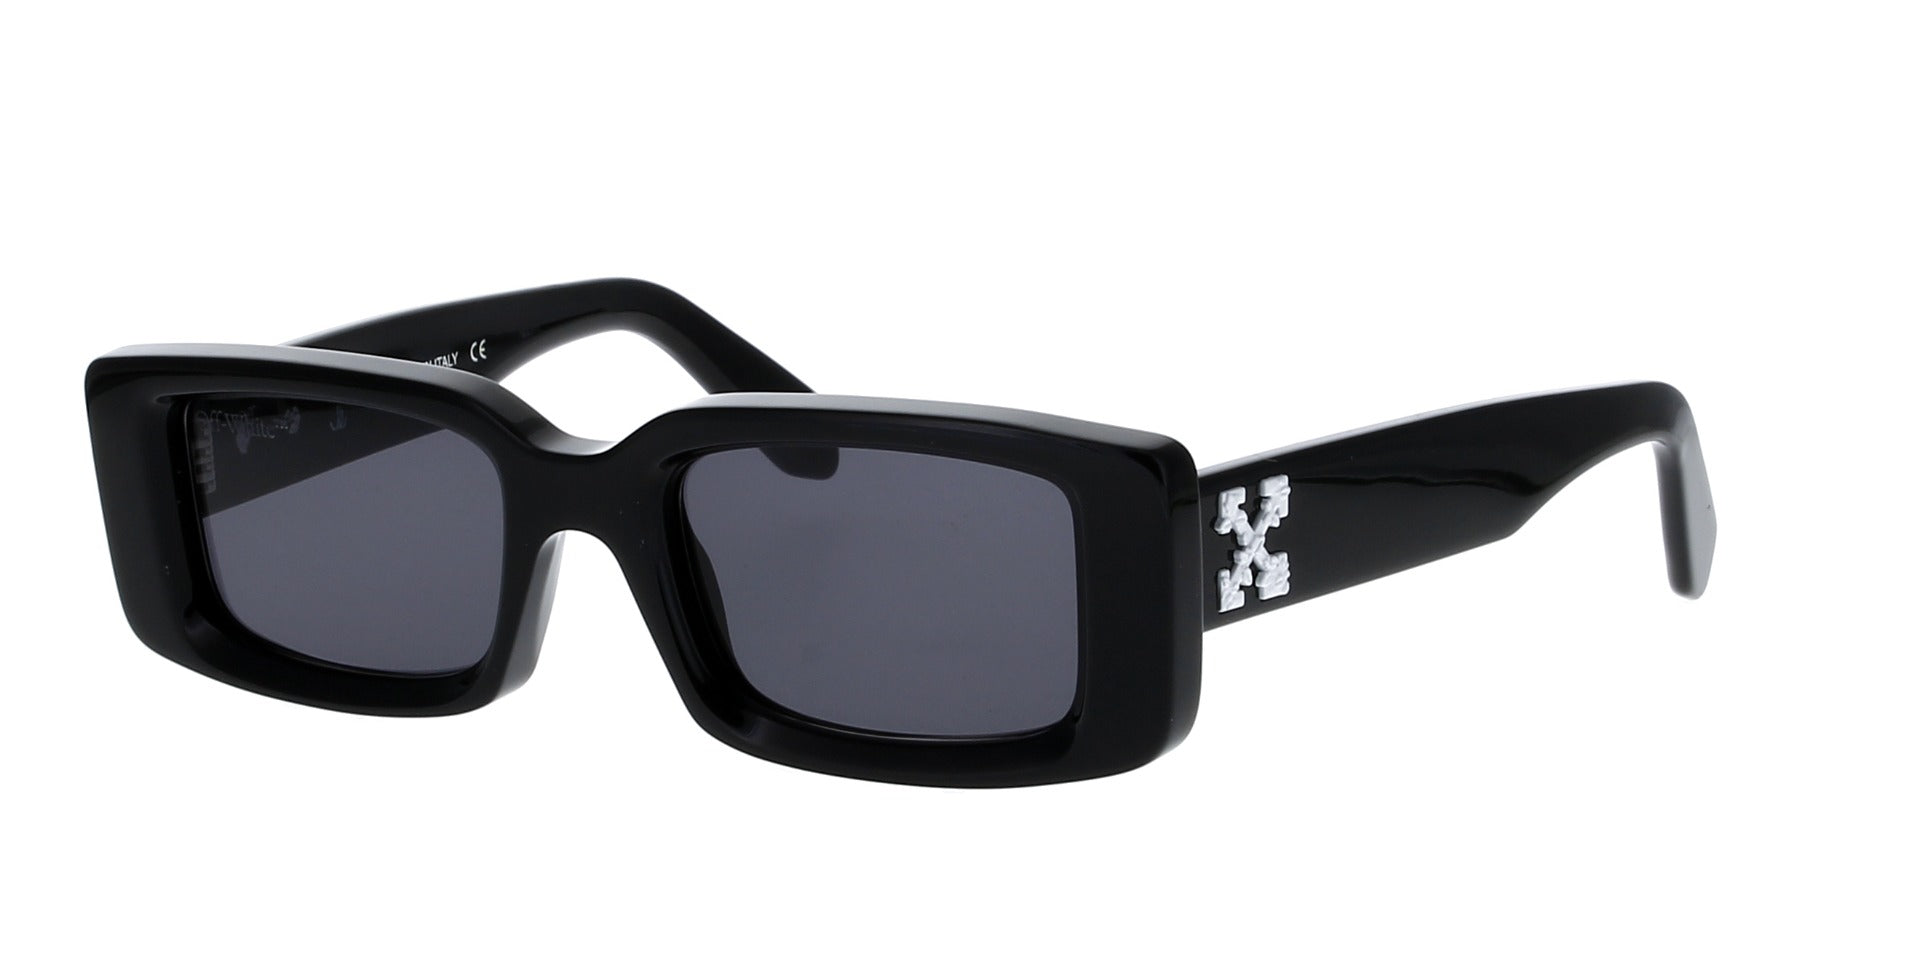 Republica Panama Sunglasses  FREE Shipping -  - SOLD OUT